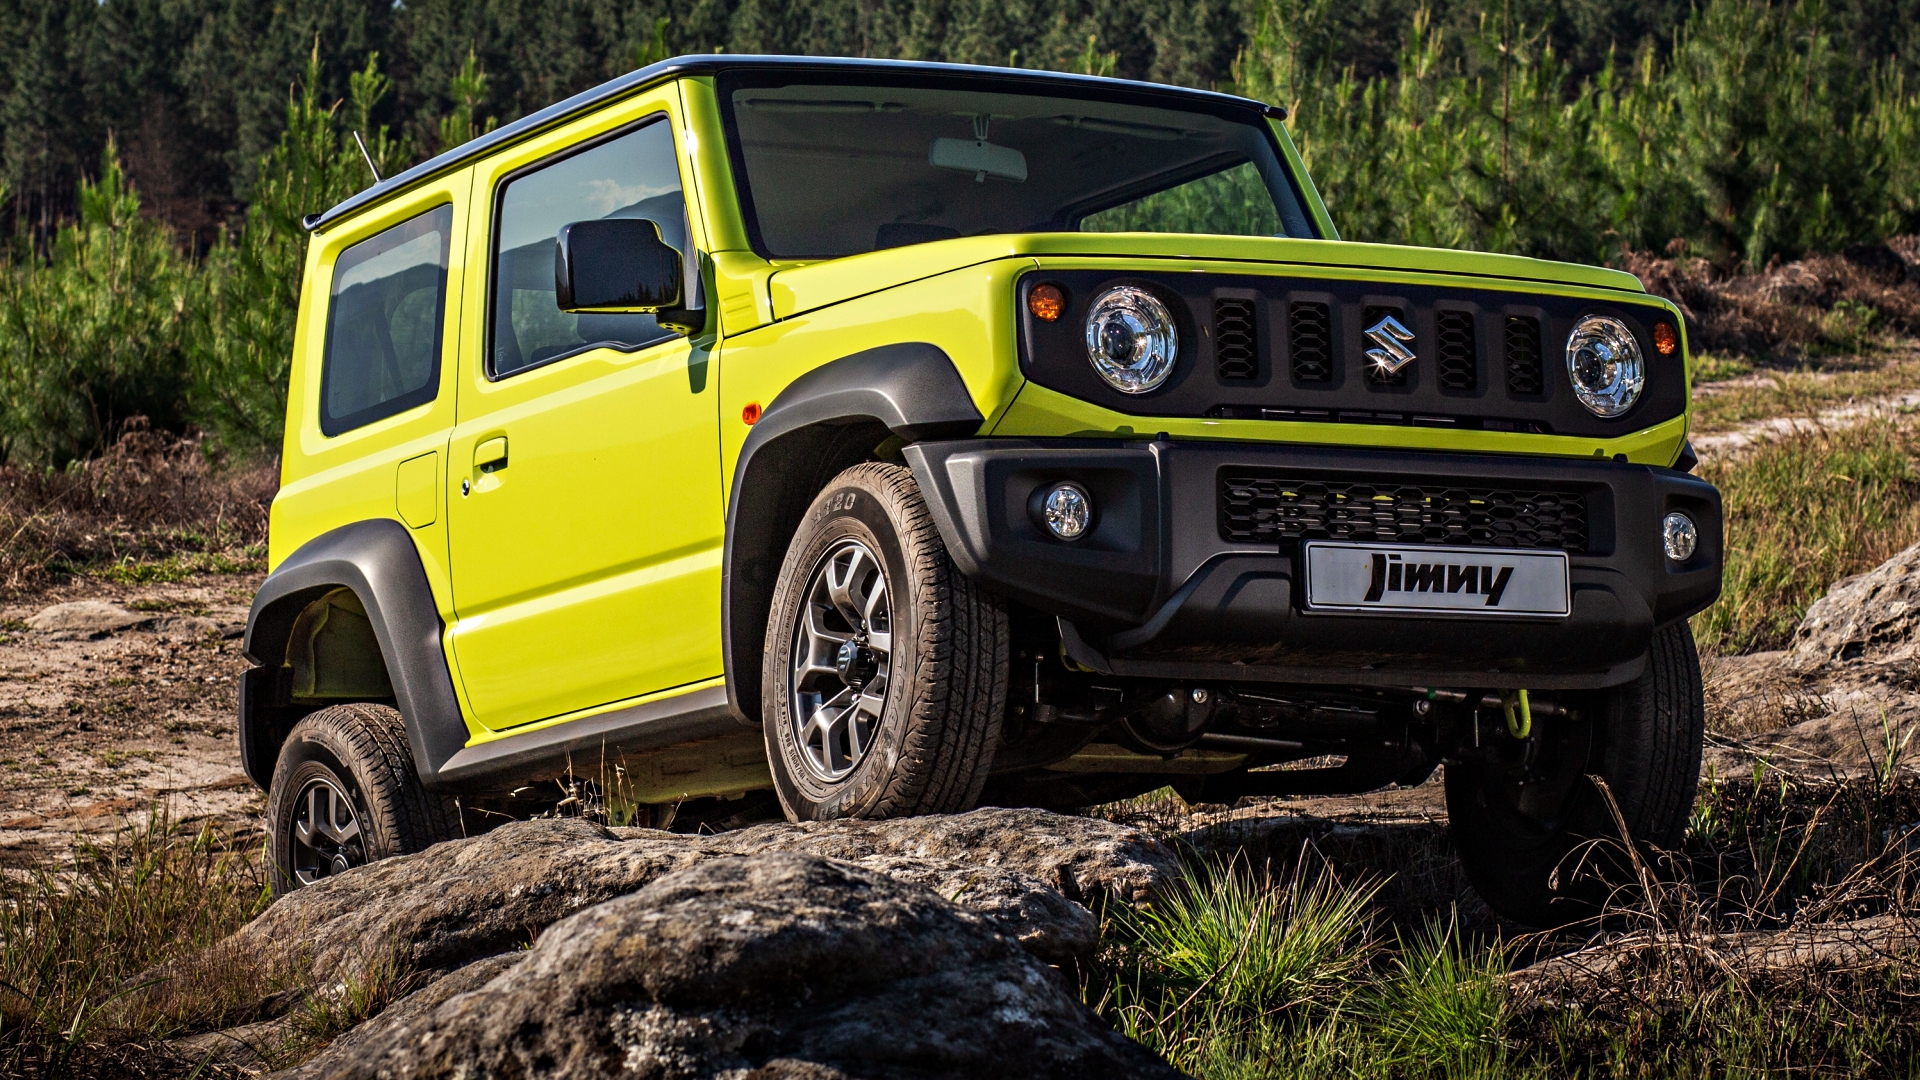 New Suzuki Jimny 4x4 - Most Affordable 4WD From $33,990+ORC